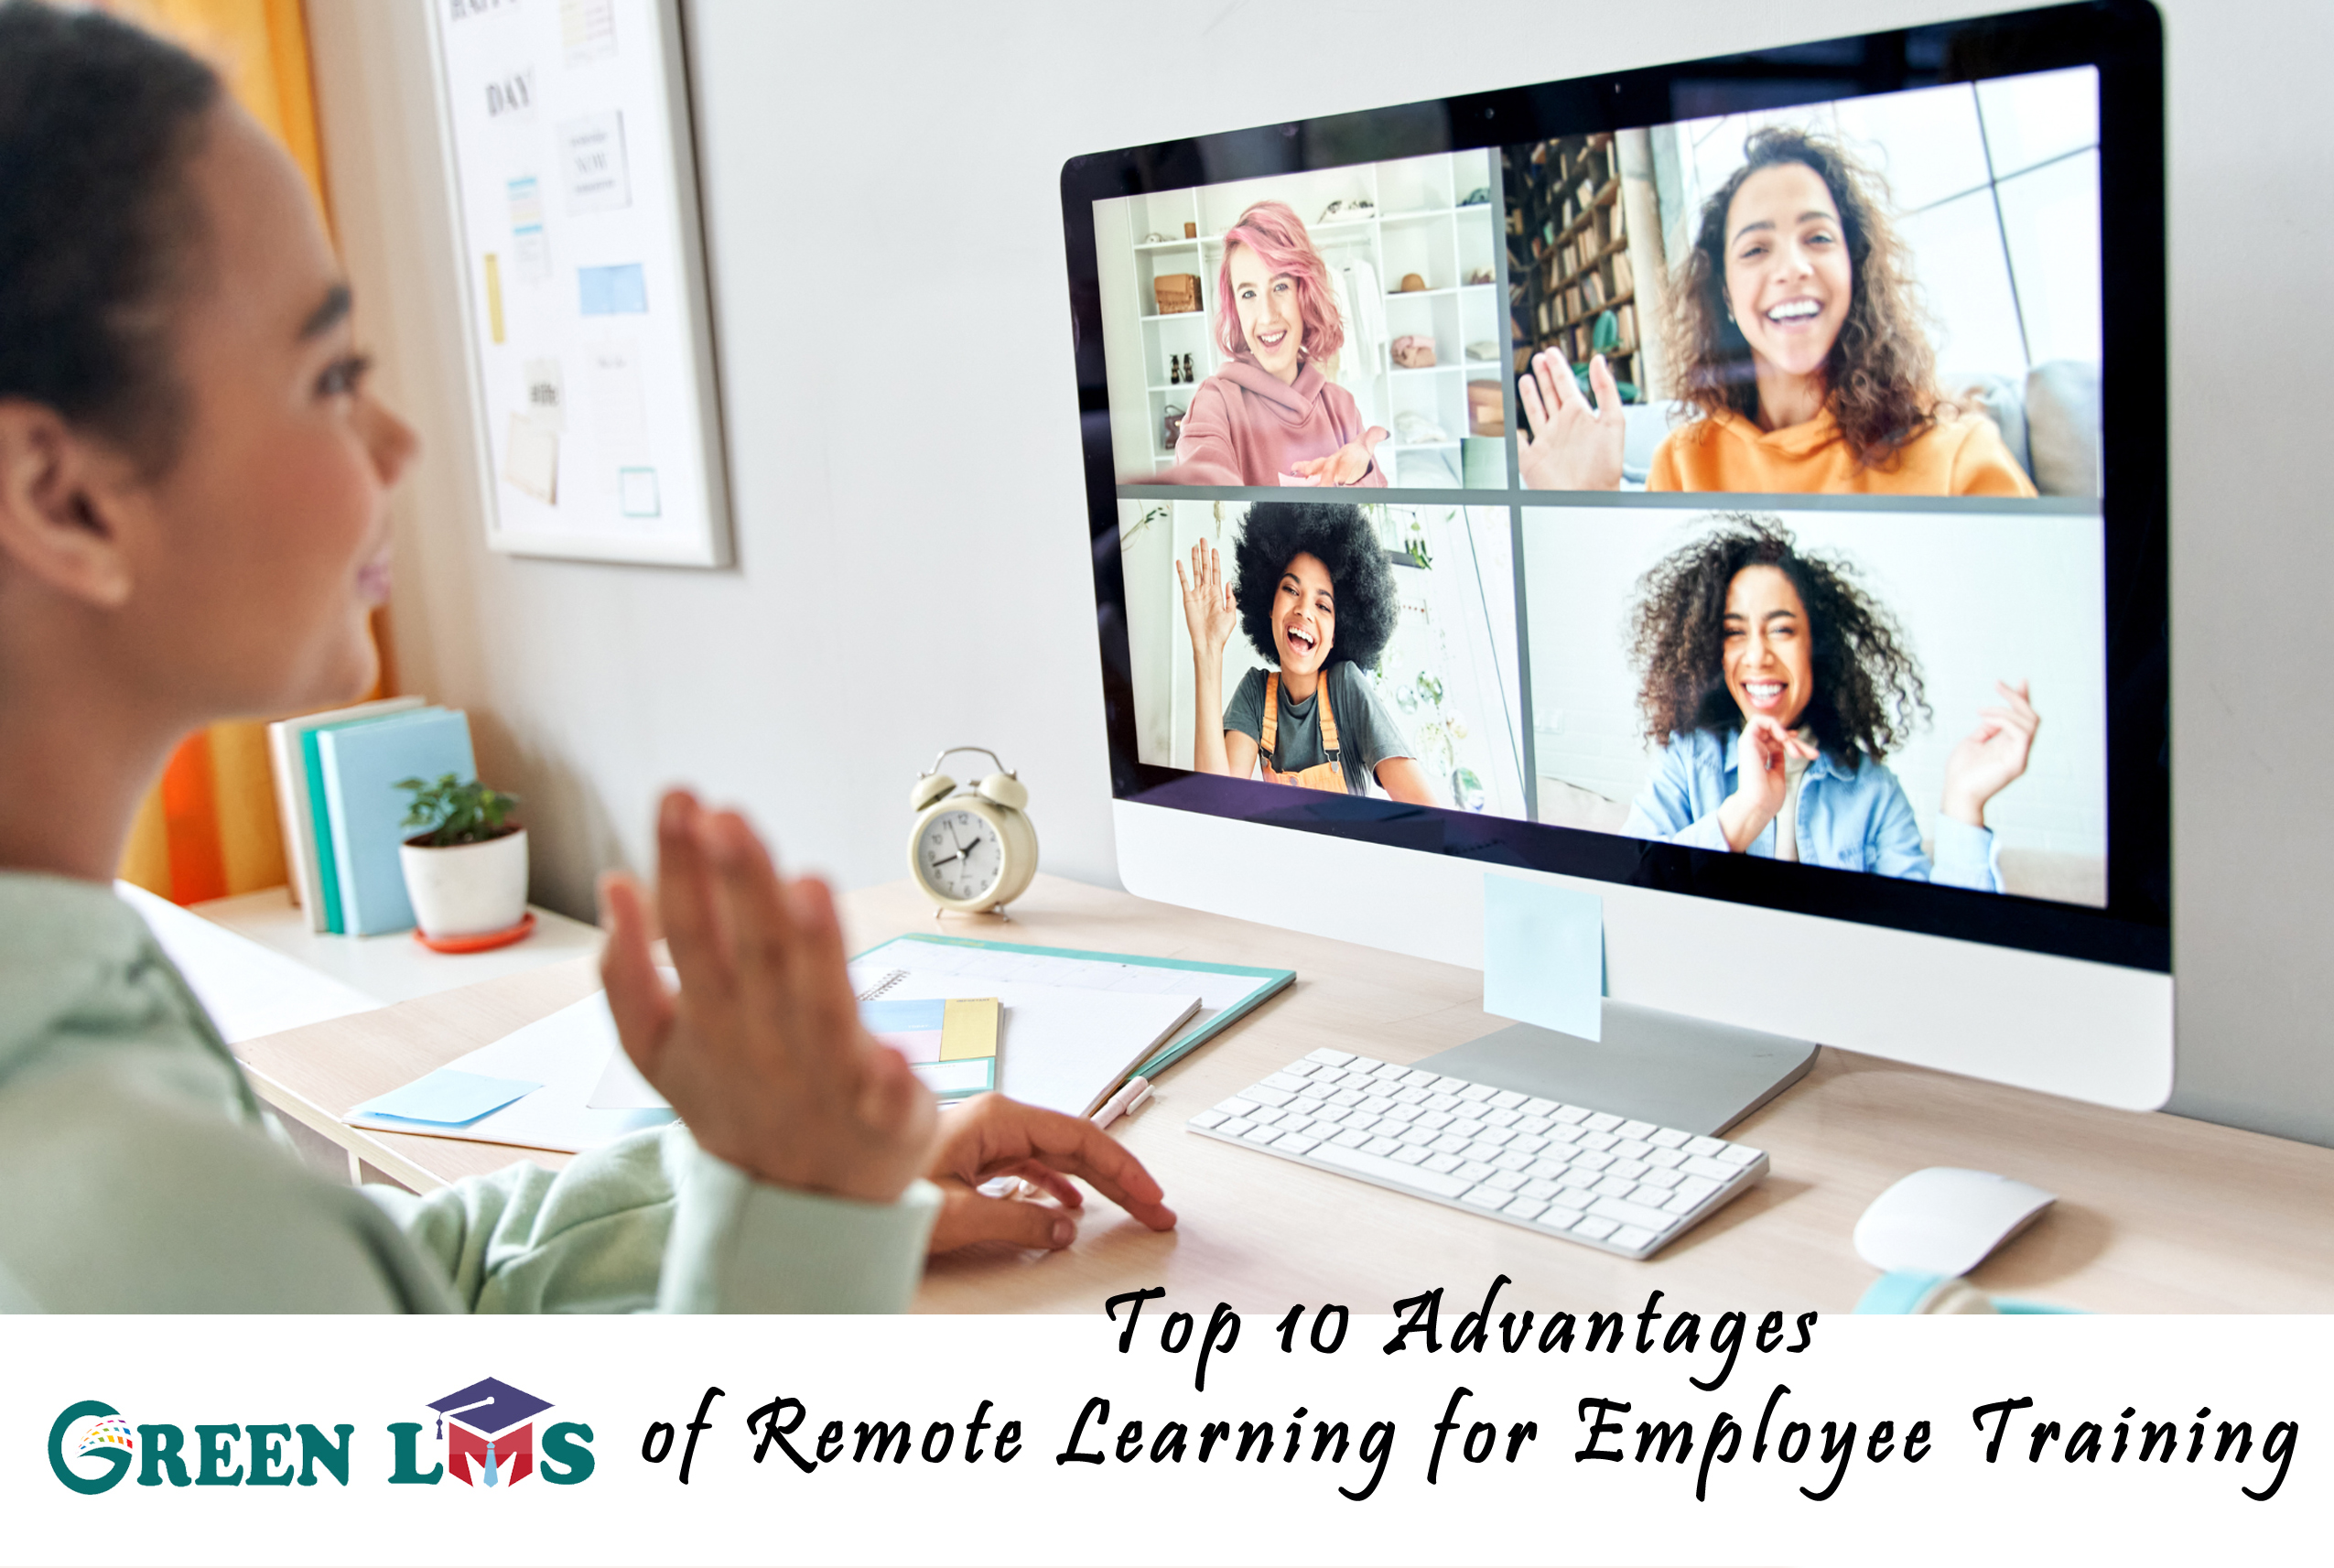 Top 10 Advantages of Remote Learning for Employee Training